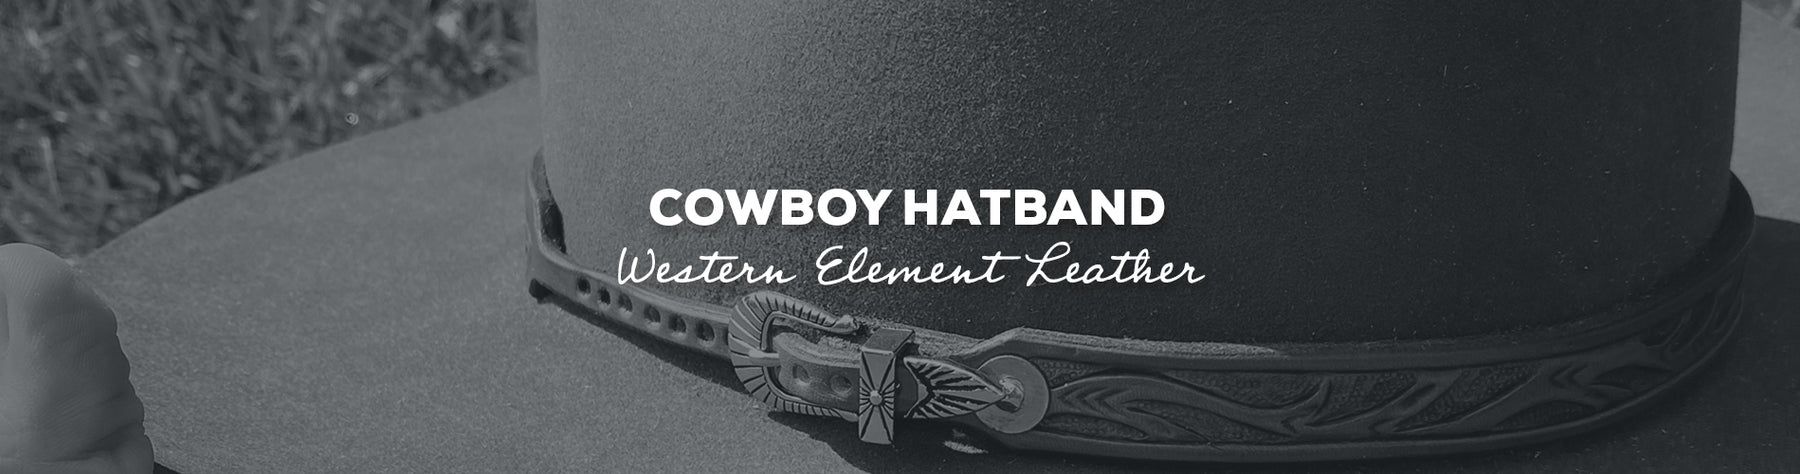 Gift Idea: Cowboy Hatband with Western Element Leather